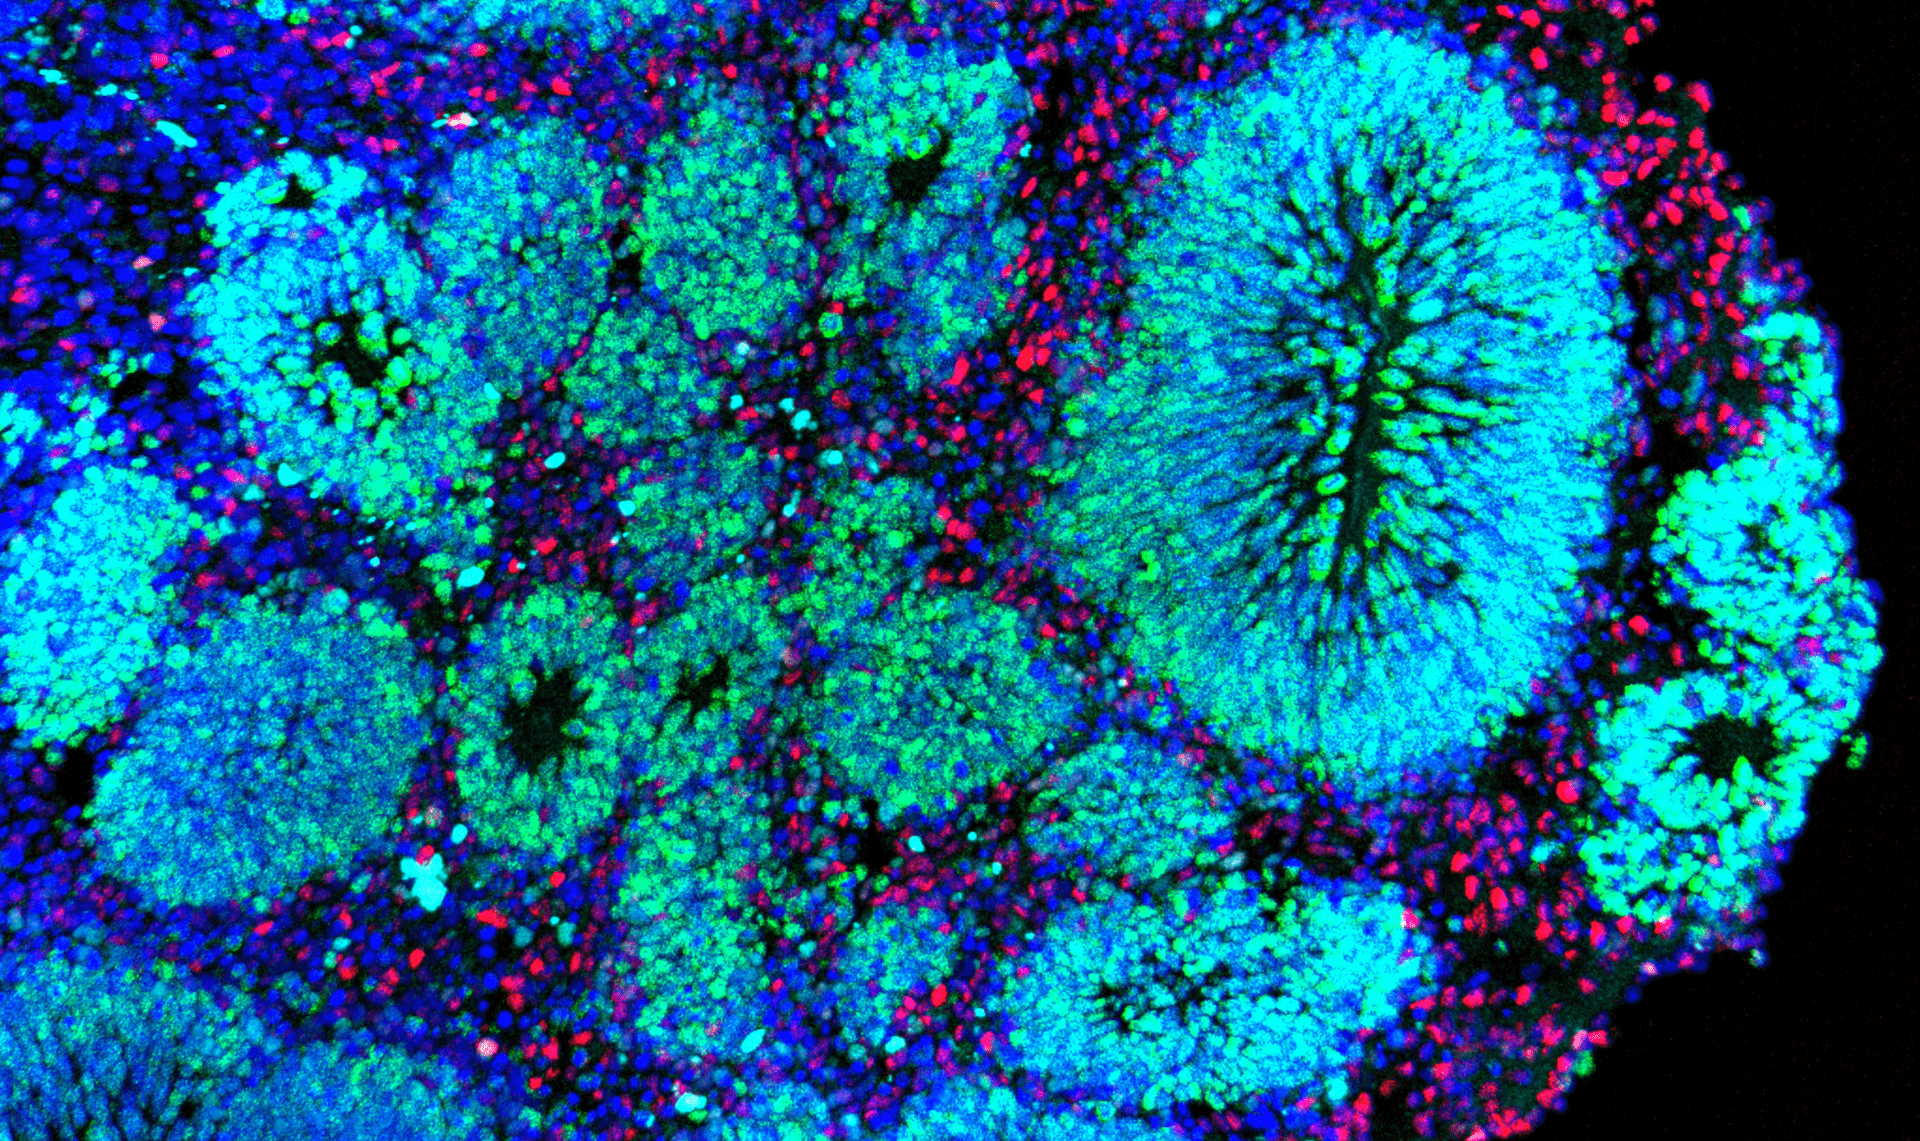 A cluster of blue, green, and red cells